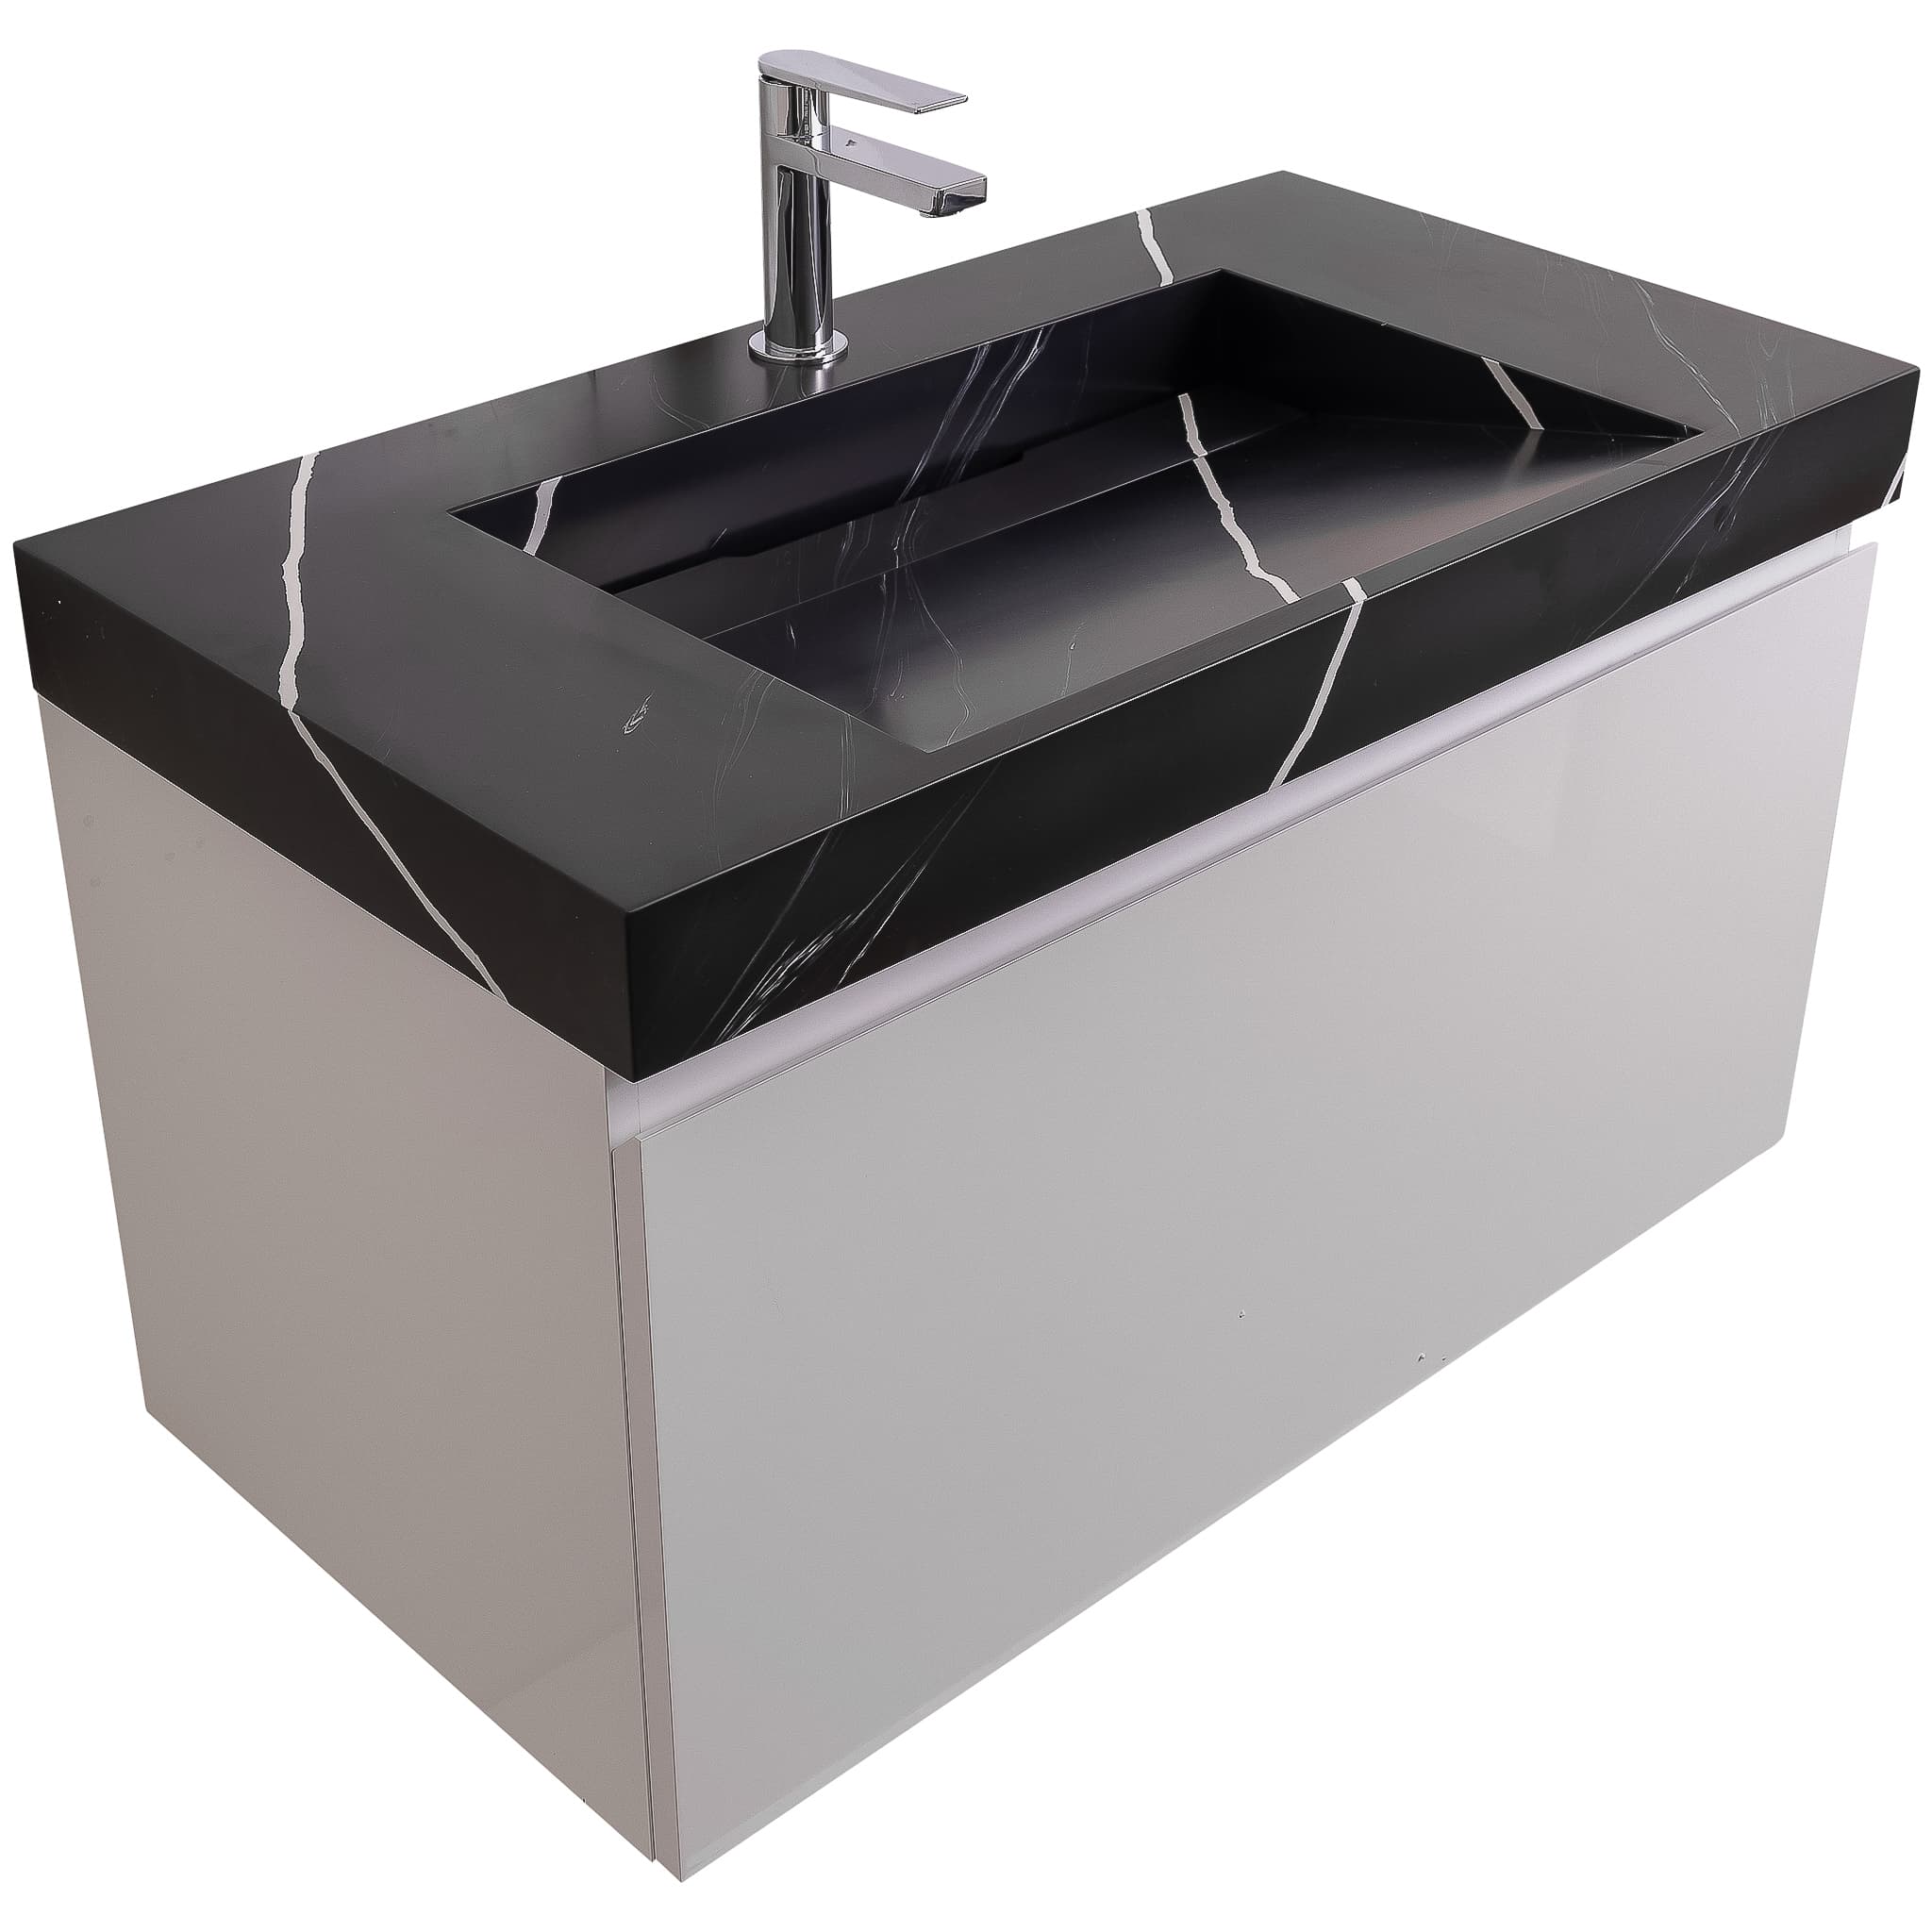 Venice 31.5 White High Gloss Cabinet, Solid Surface Matte Black Carrara Infinity Sink, Wall Mounted Modern Vanity Set